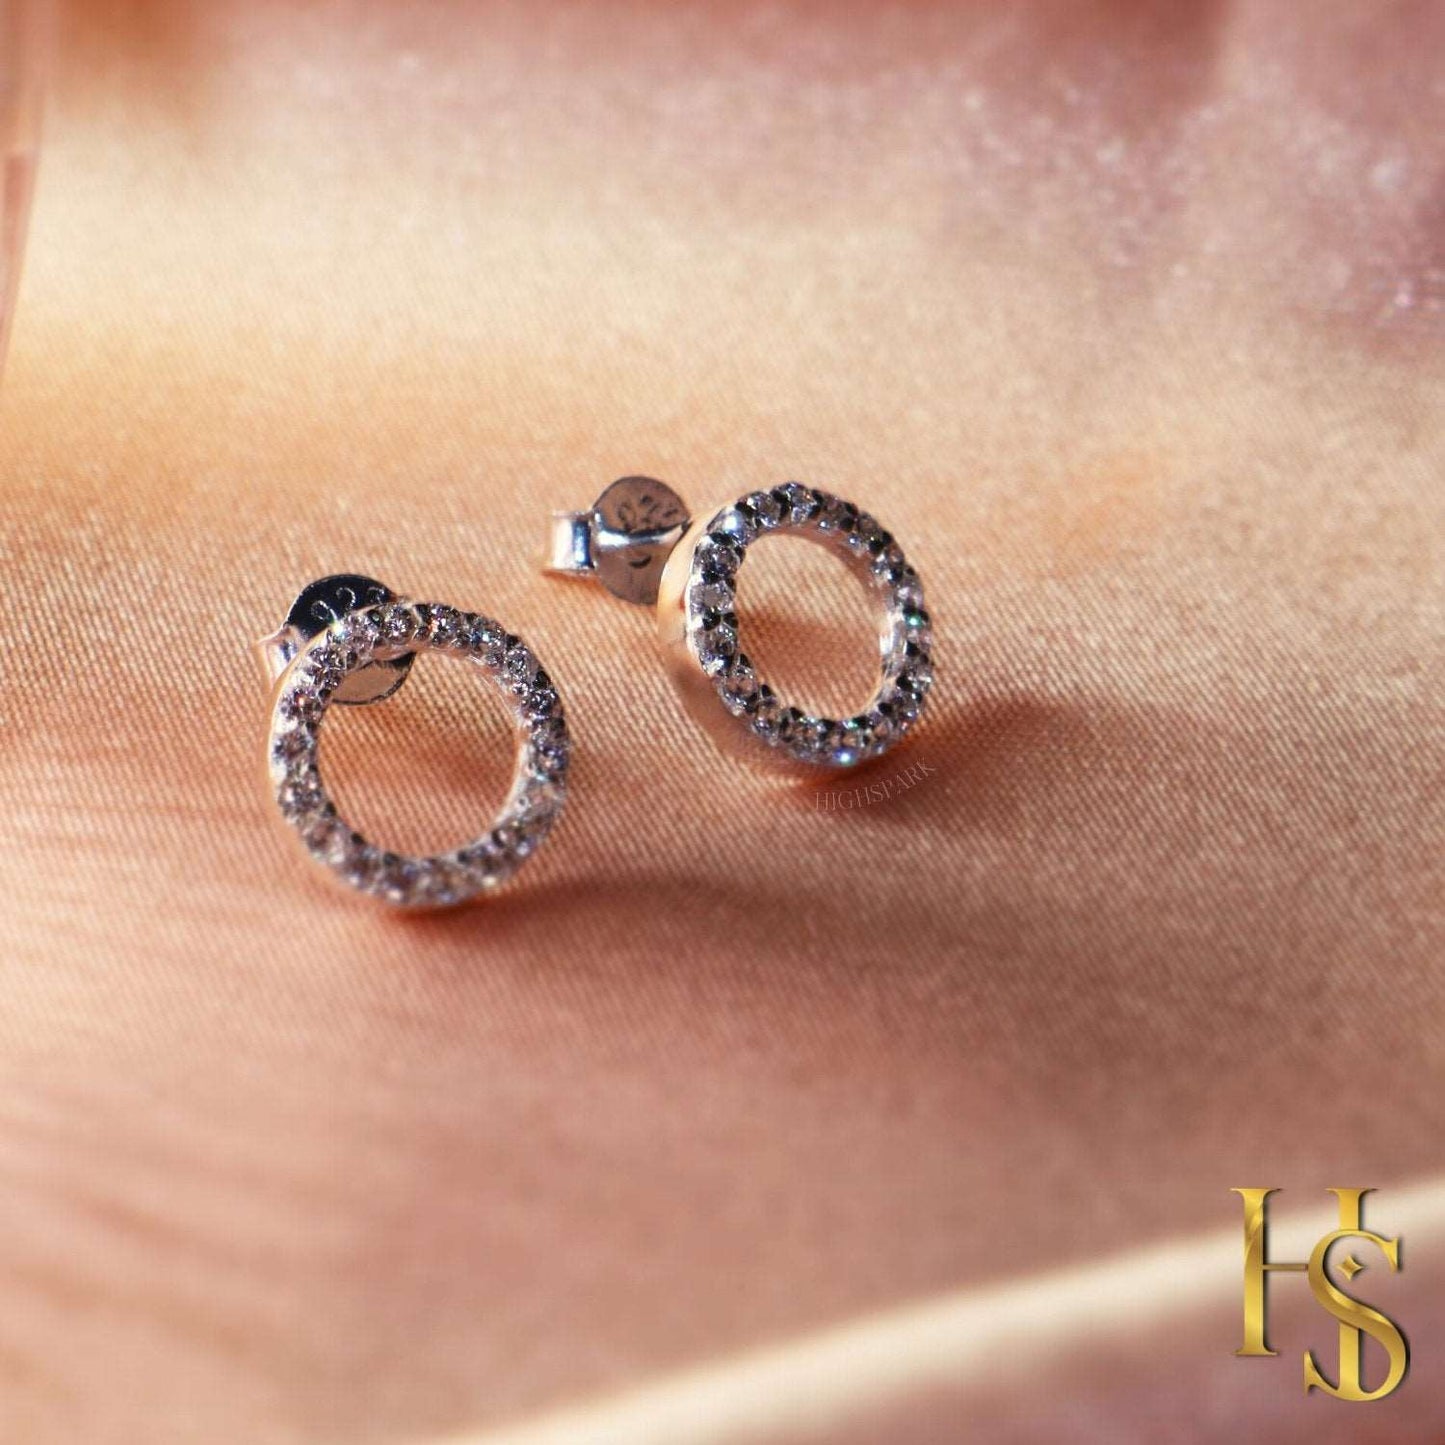 Circle of Life Earrings - 92.5 Silver - Celebrity  Earrings - Unity, Wholeness and Completeness